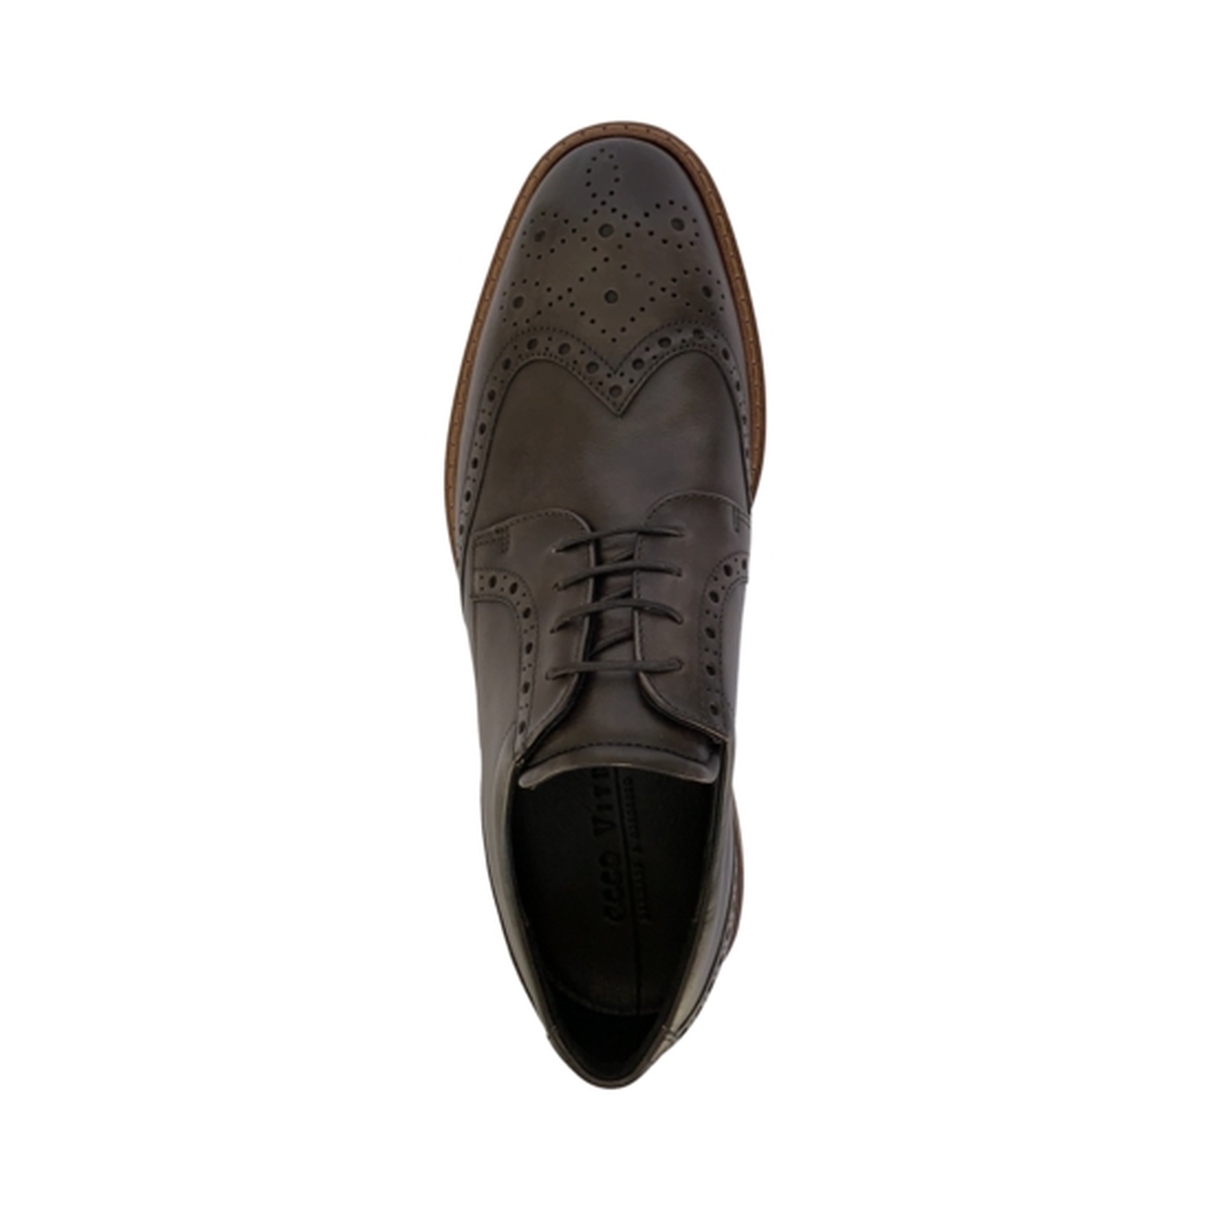 Ecco Vitrus I - Brown smooth leather